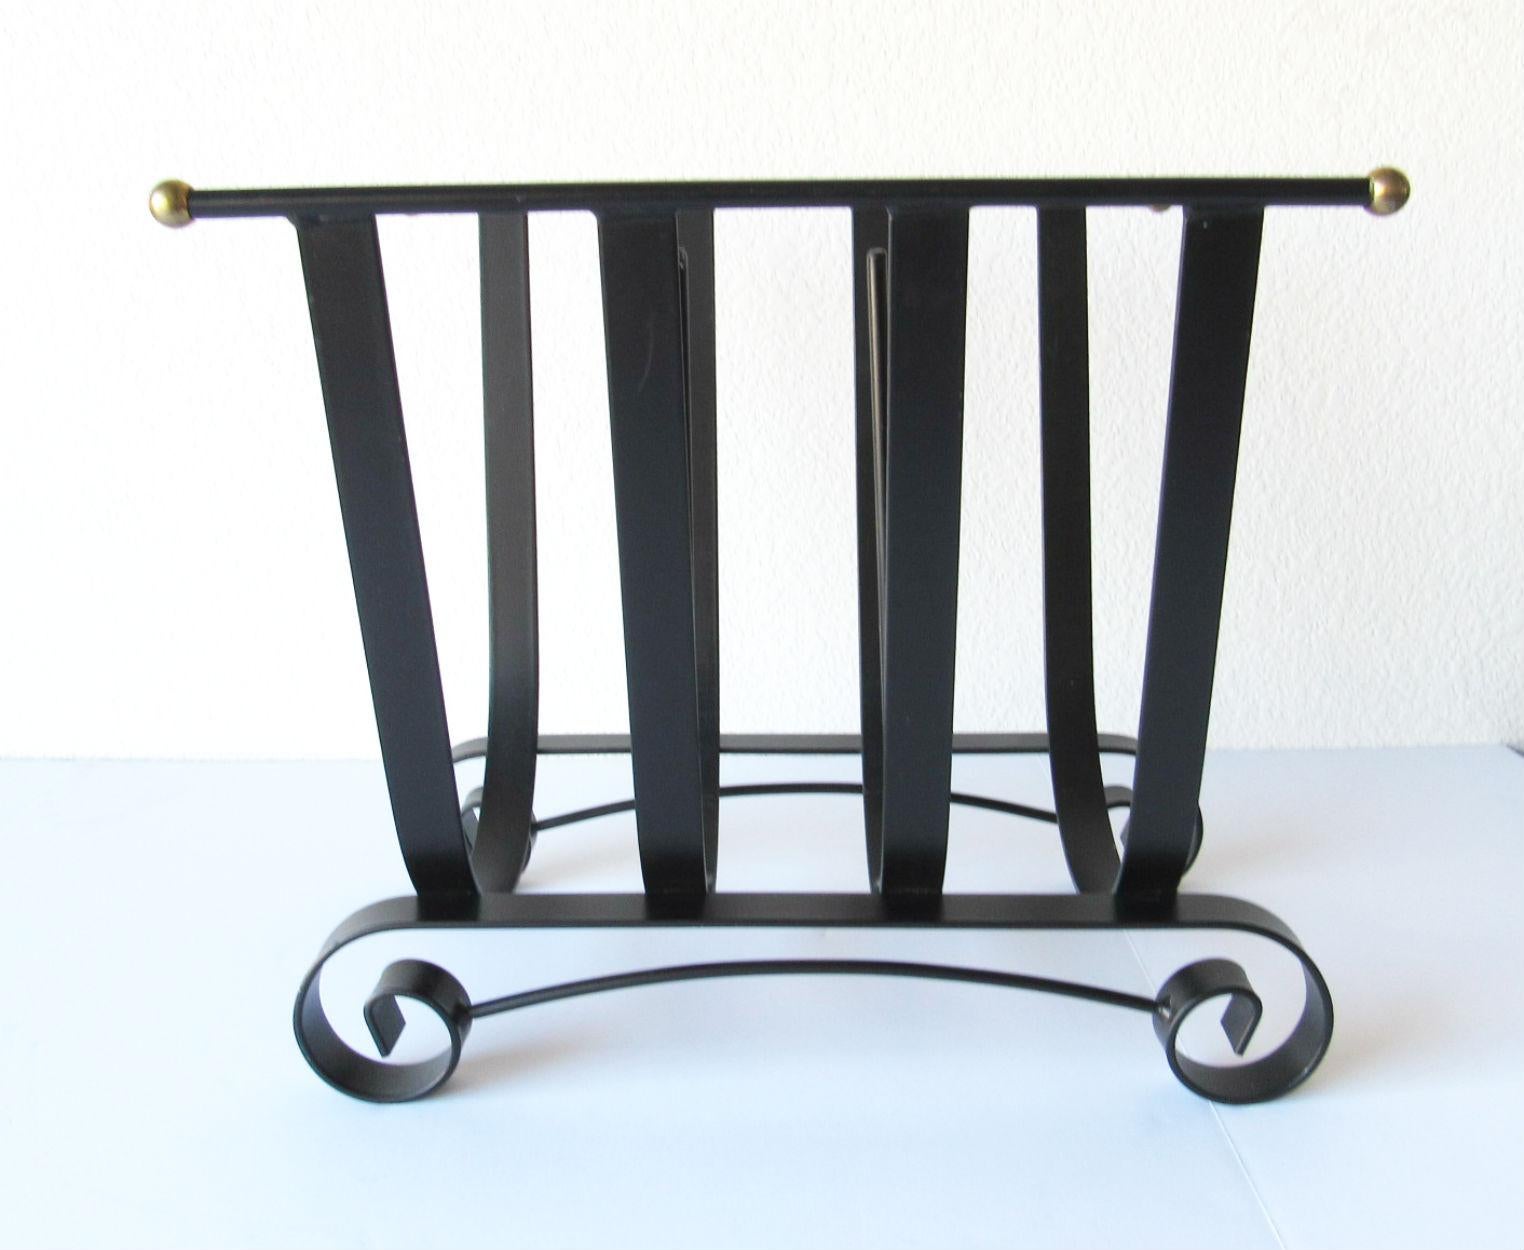 20th Century Design Wrought Iron Log Holder or Magazine Holder In Good Condition For Sale In Surprise, AZ